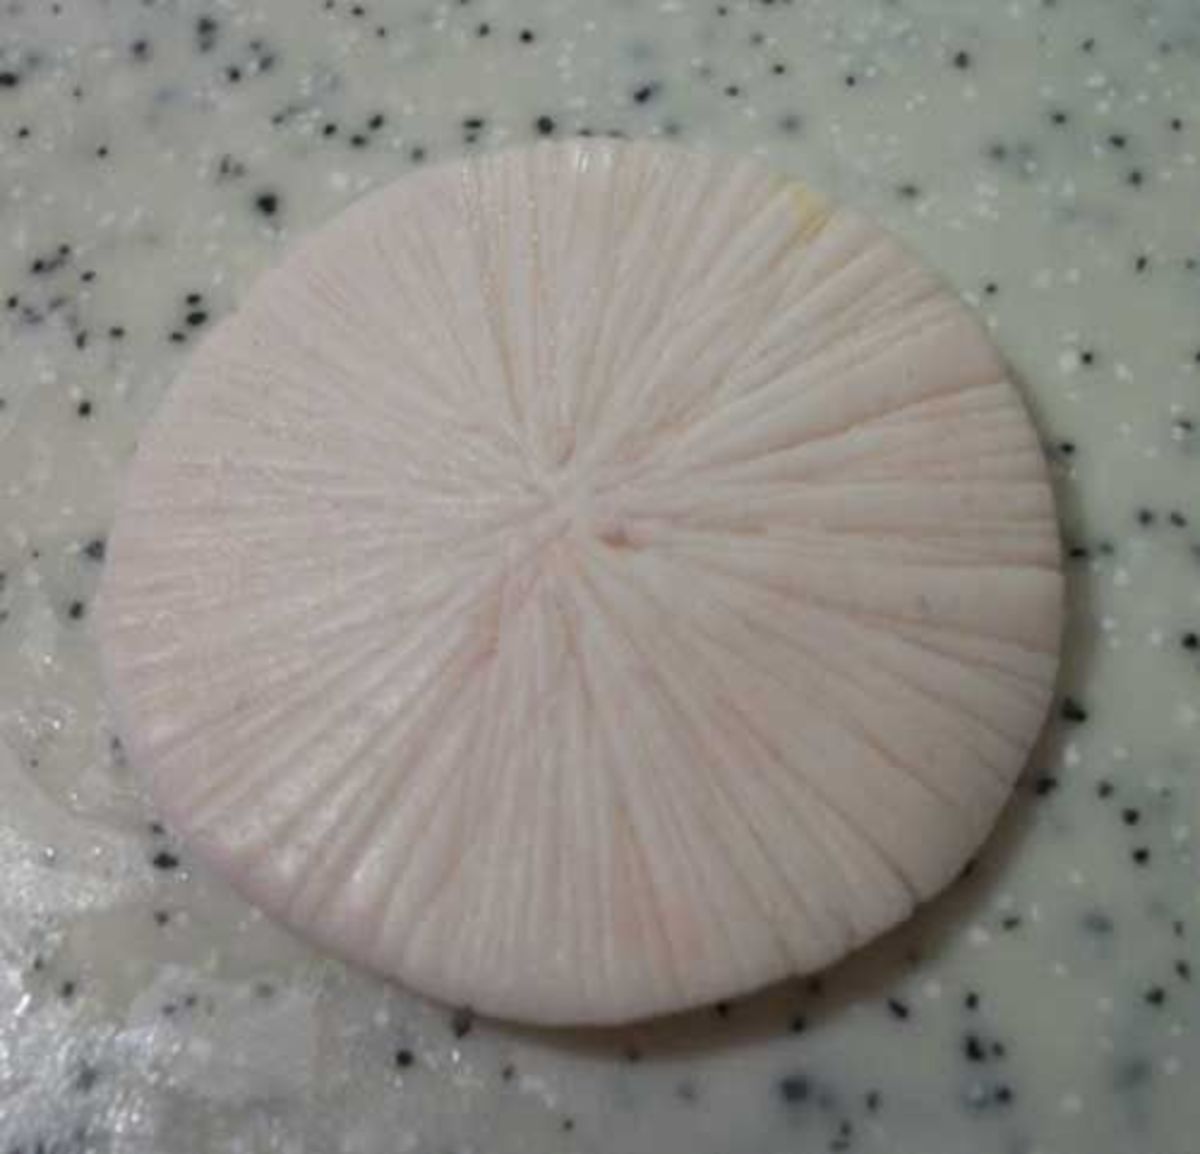 Flatten the ball and then score it with an X-Acto knife. This will be the underside of the mushroom cap.